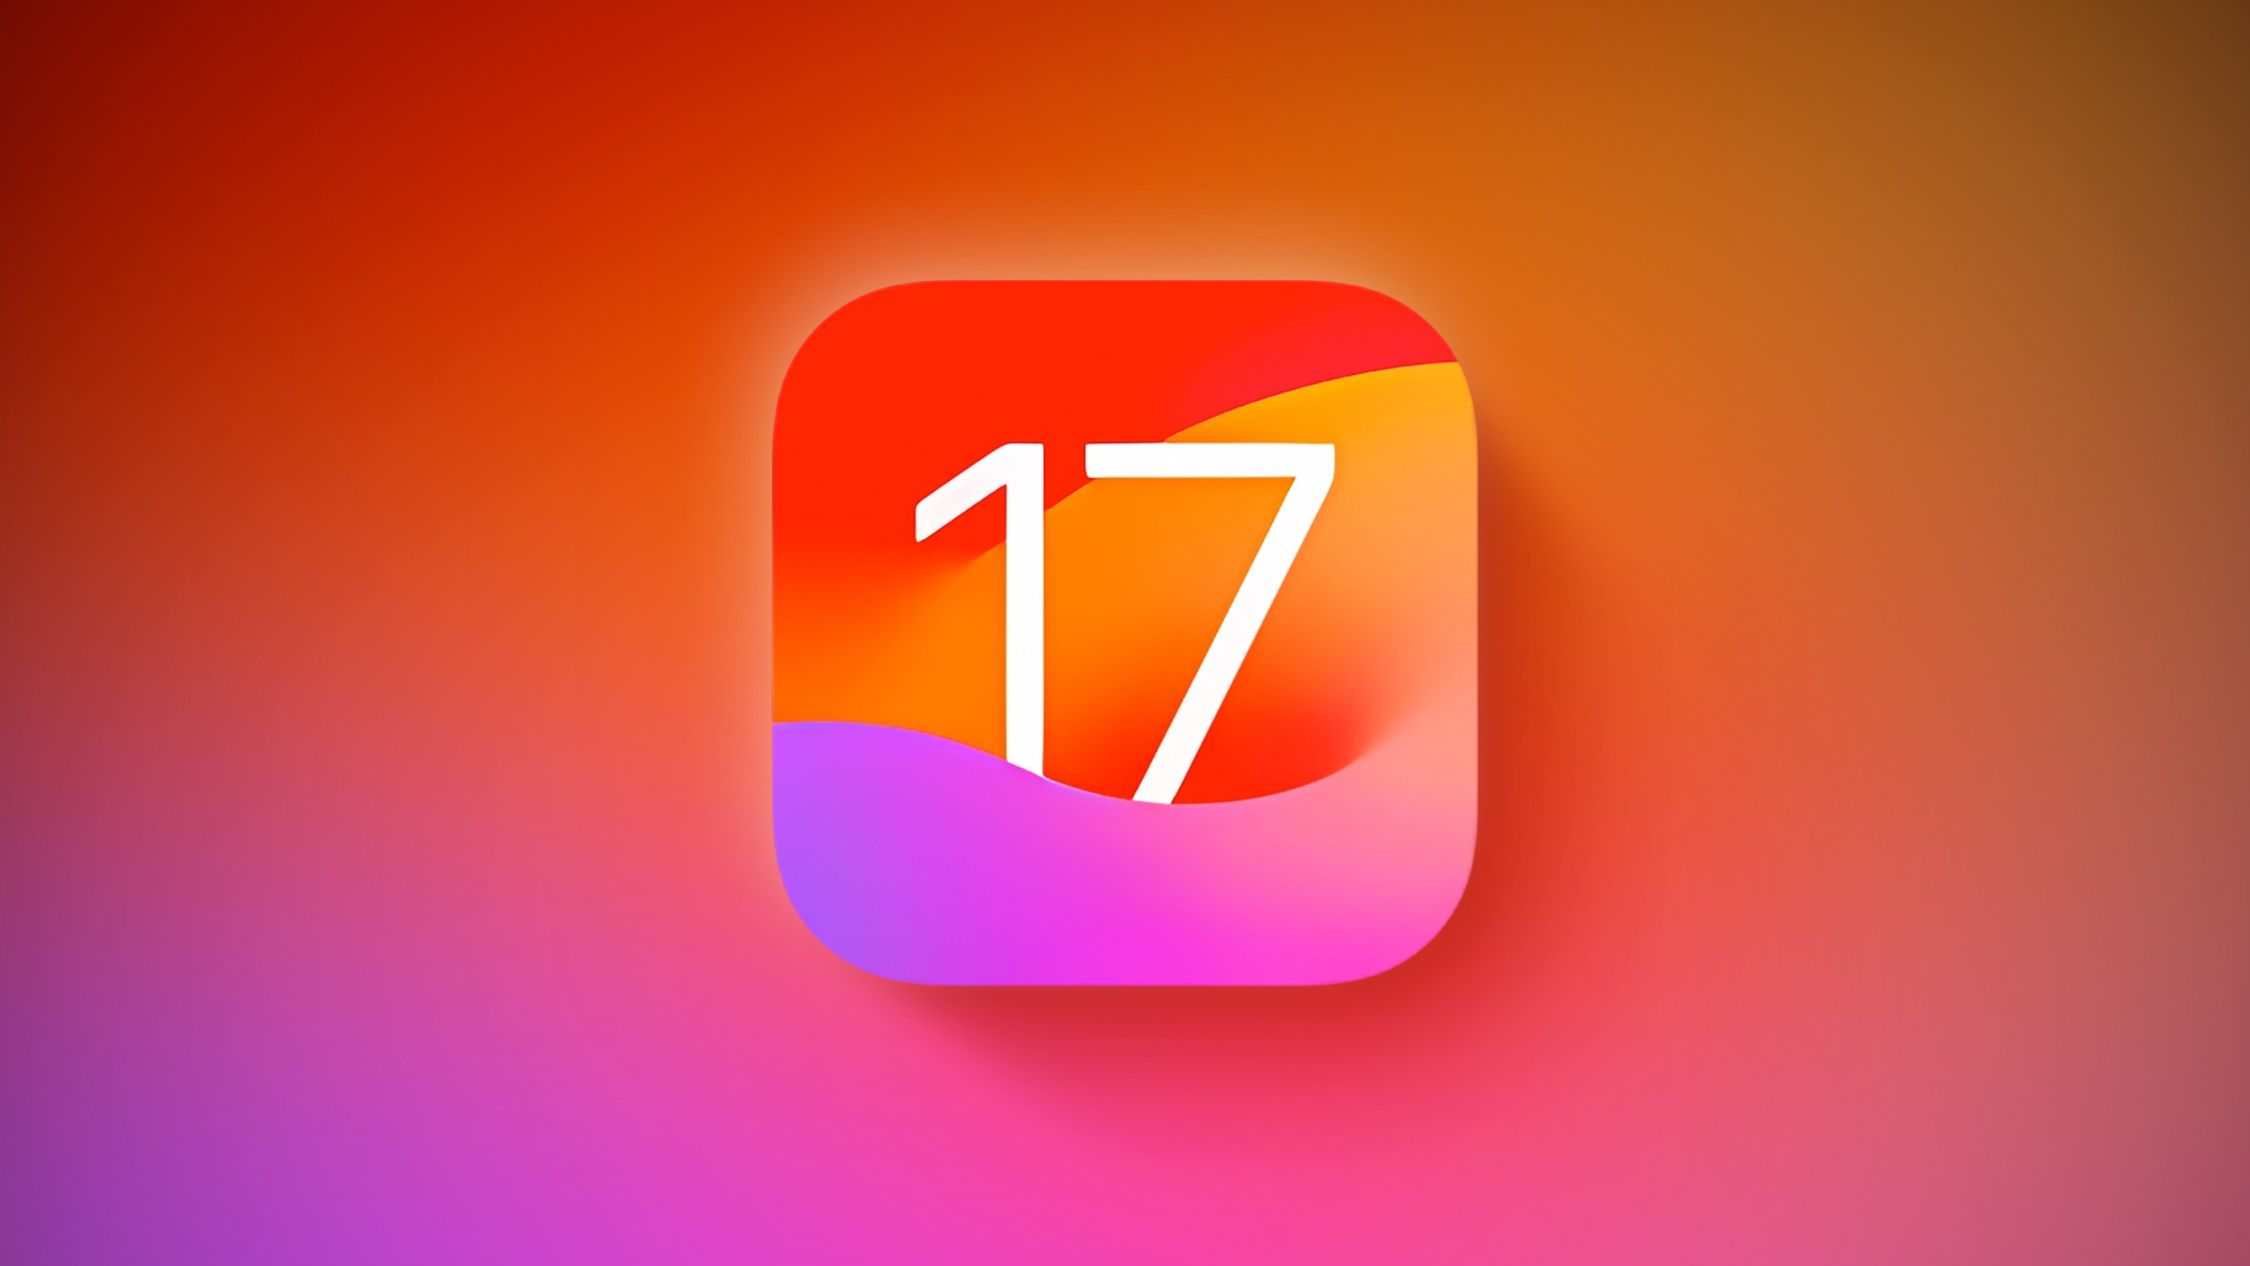 Parafrasea y traduce esto al castellano: iOS 17 Launching Tomorrow for iPhones With These 10 New Features